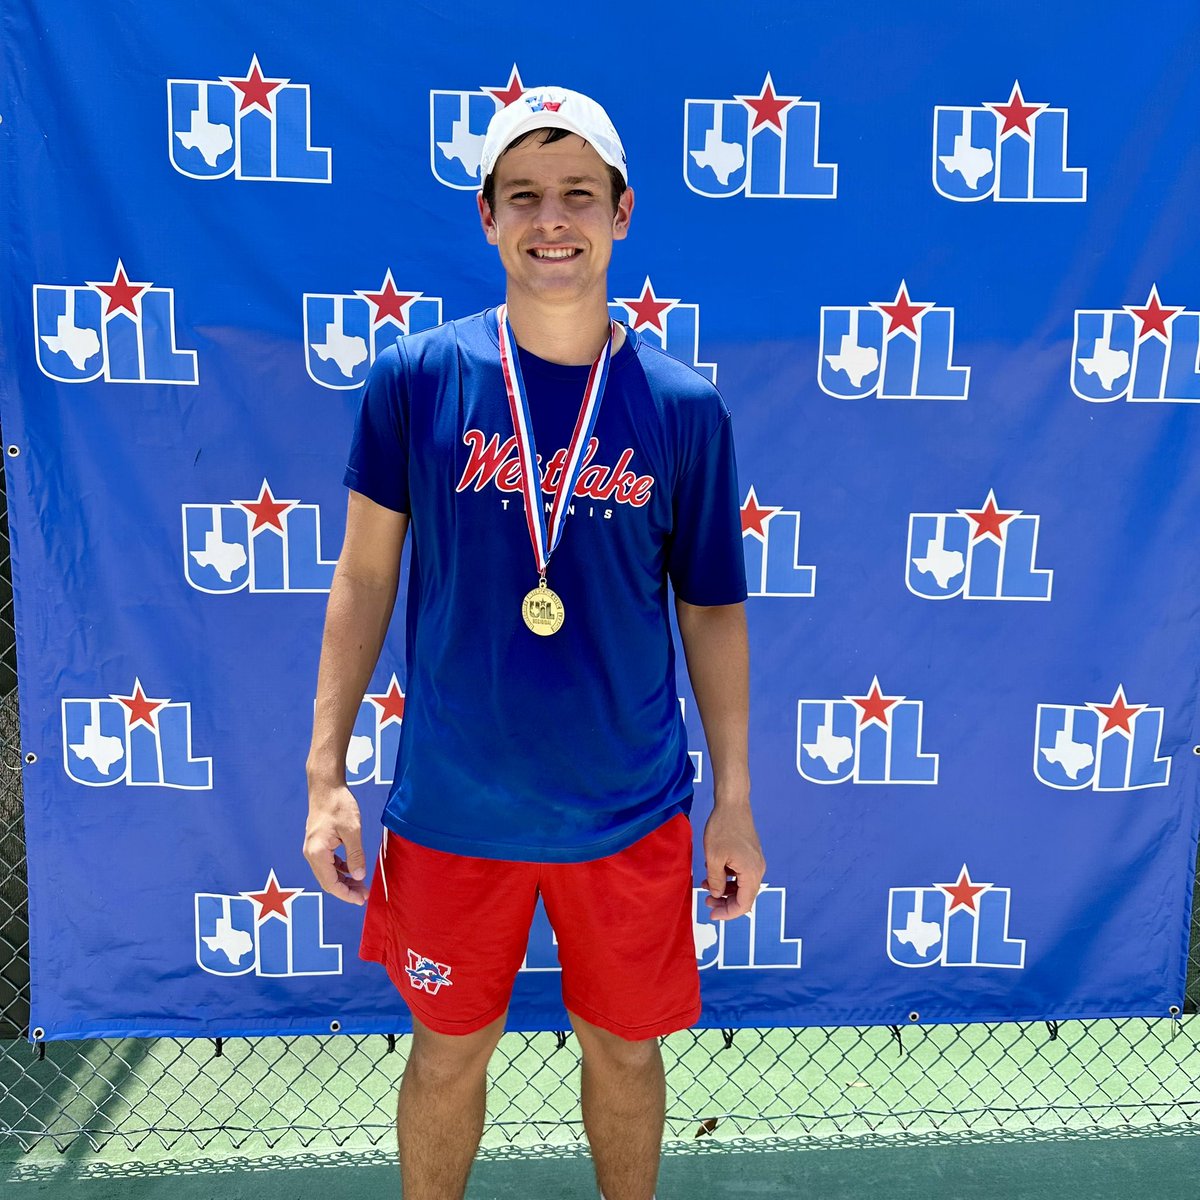 Congratulations to Luke Riezebeek on his victory at the Region IV Men’s Singles Finals. Luke’s region title earns him a spot in the Men’s Singles draw at the 6A State Tennis Tournament. #GoChaps